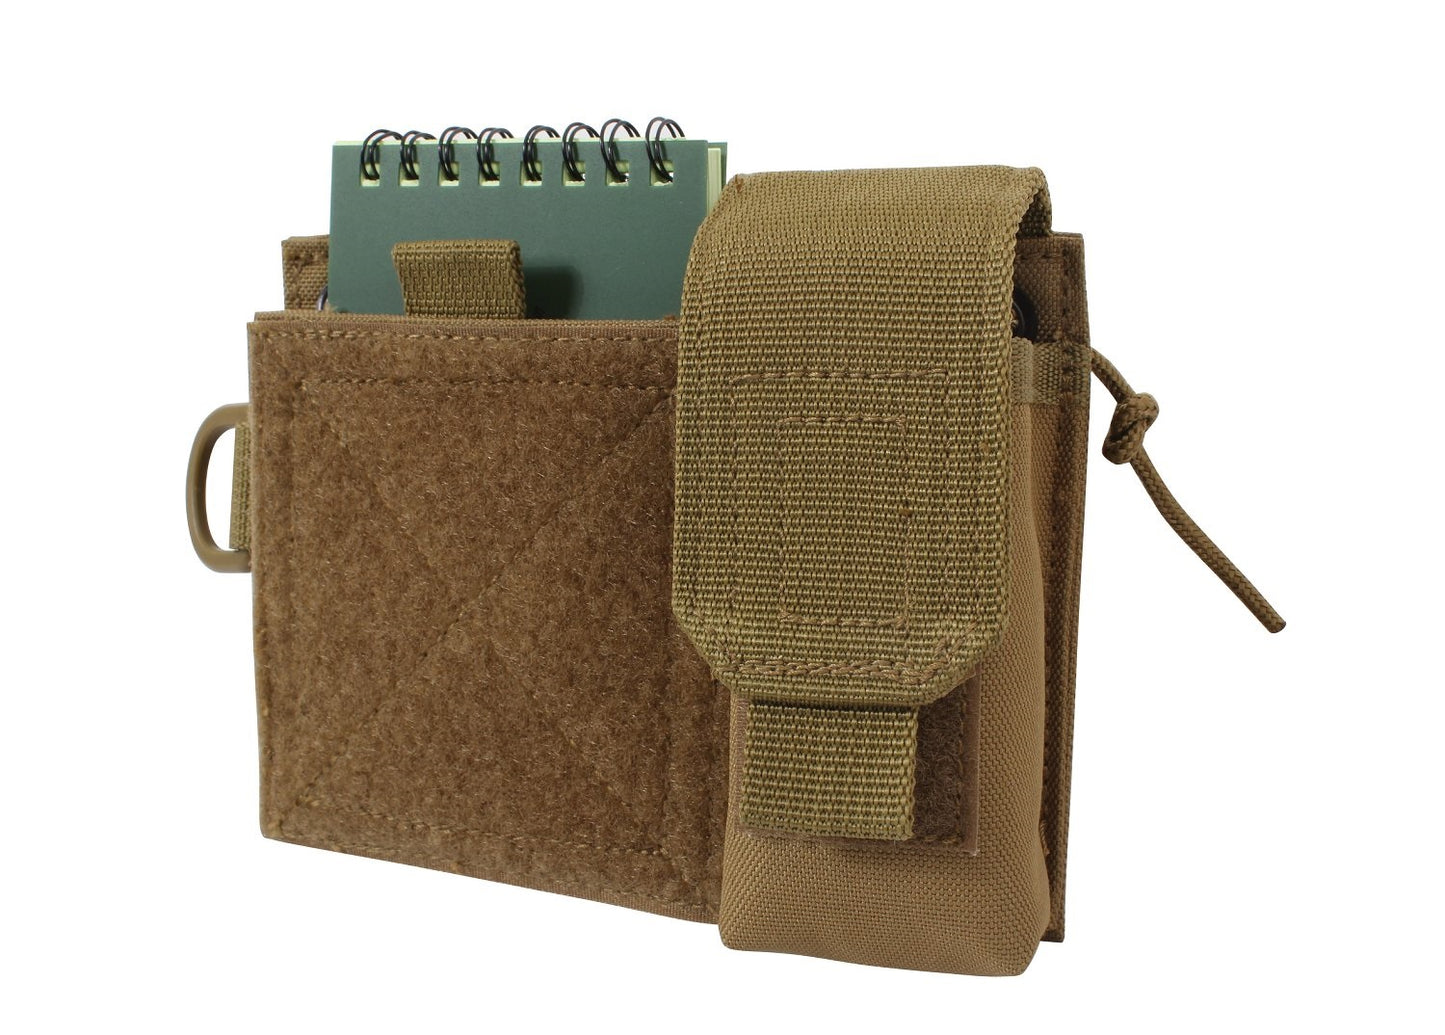 Administrative Pouch - Molle w/ Cell Pouches - Black or Brown